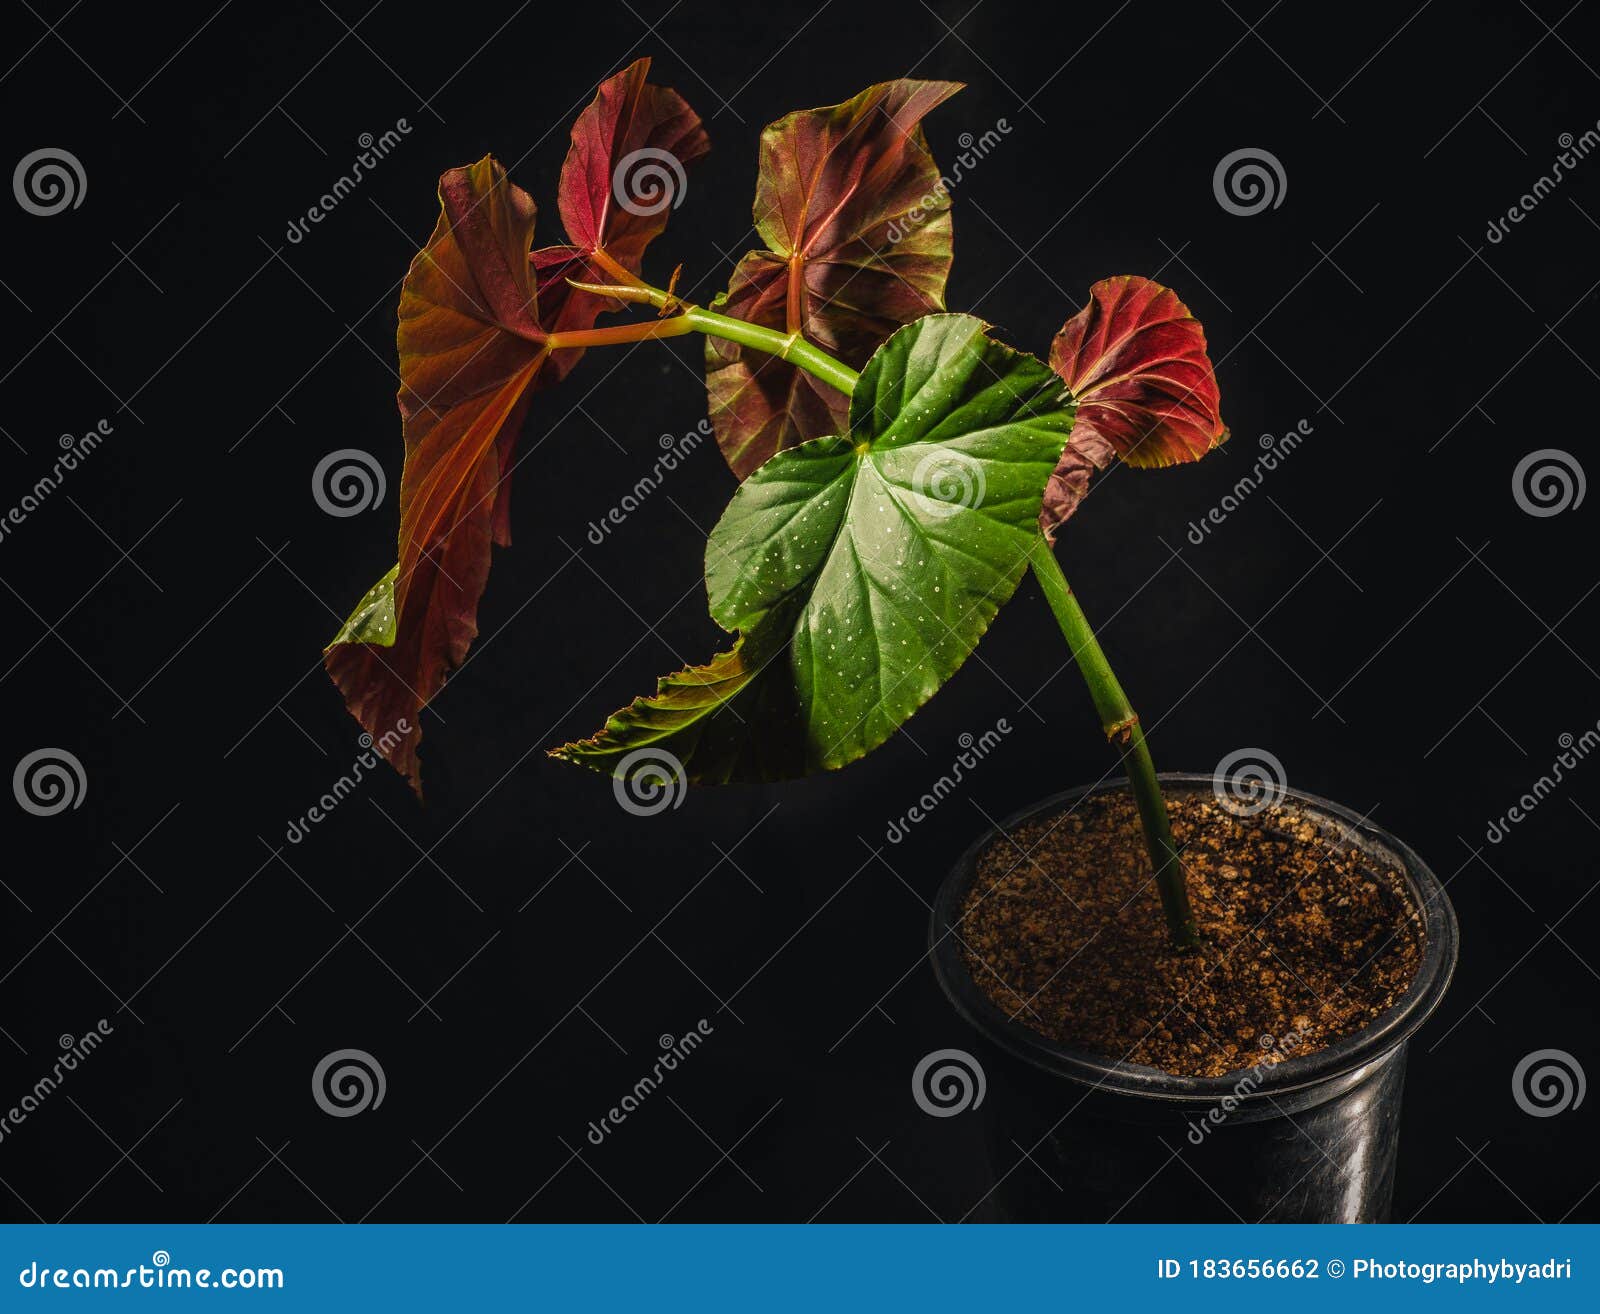 begonia lucerna or angel wing begonia is a common flowering houseplant